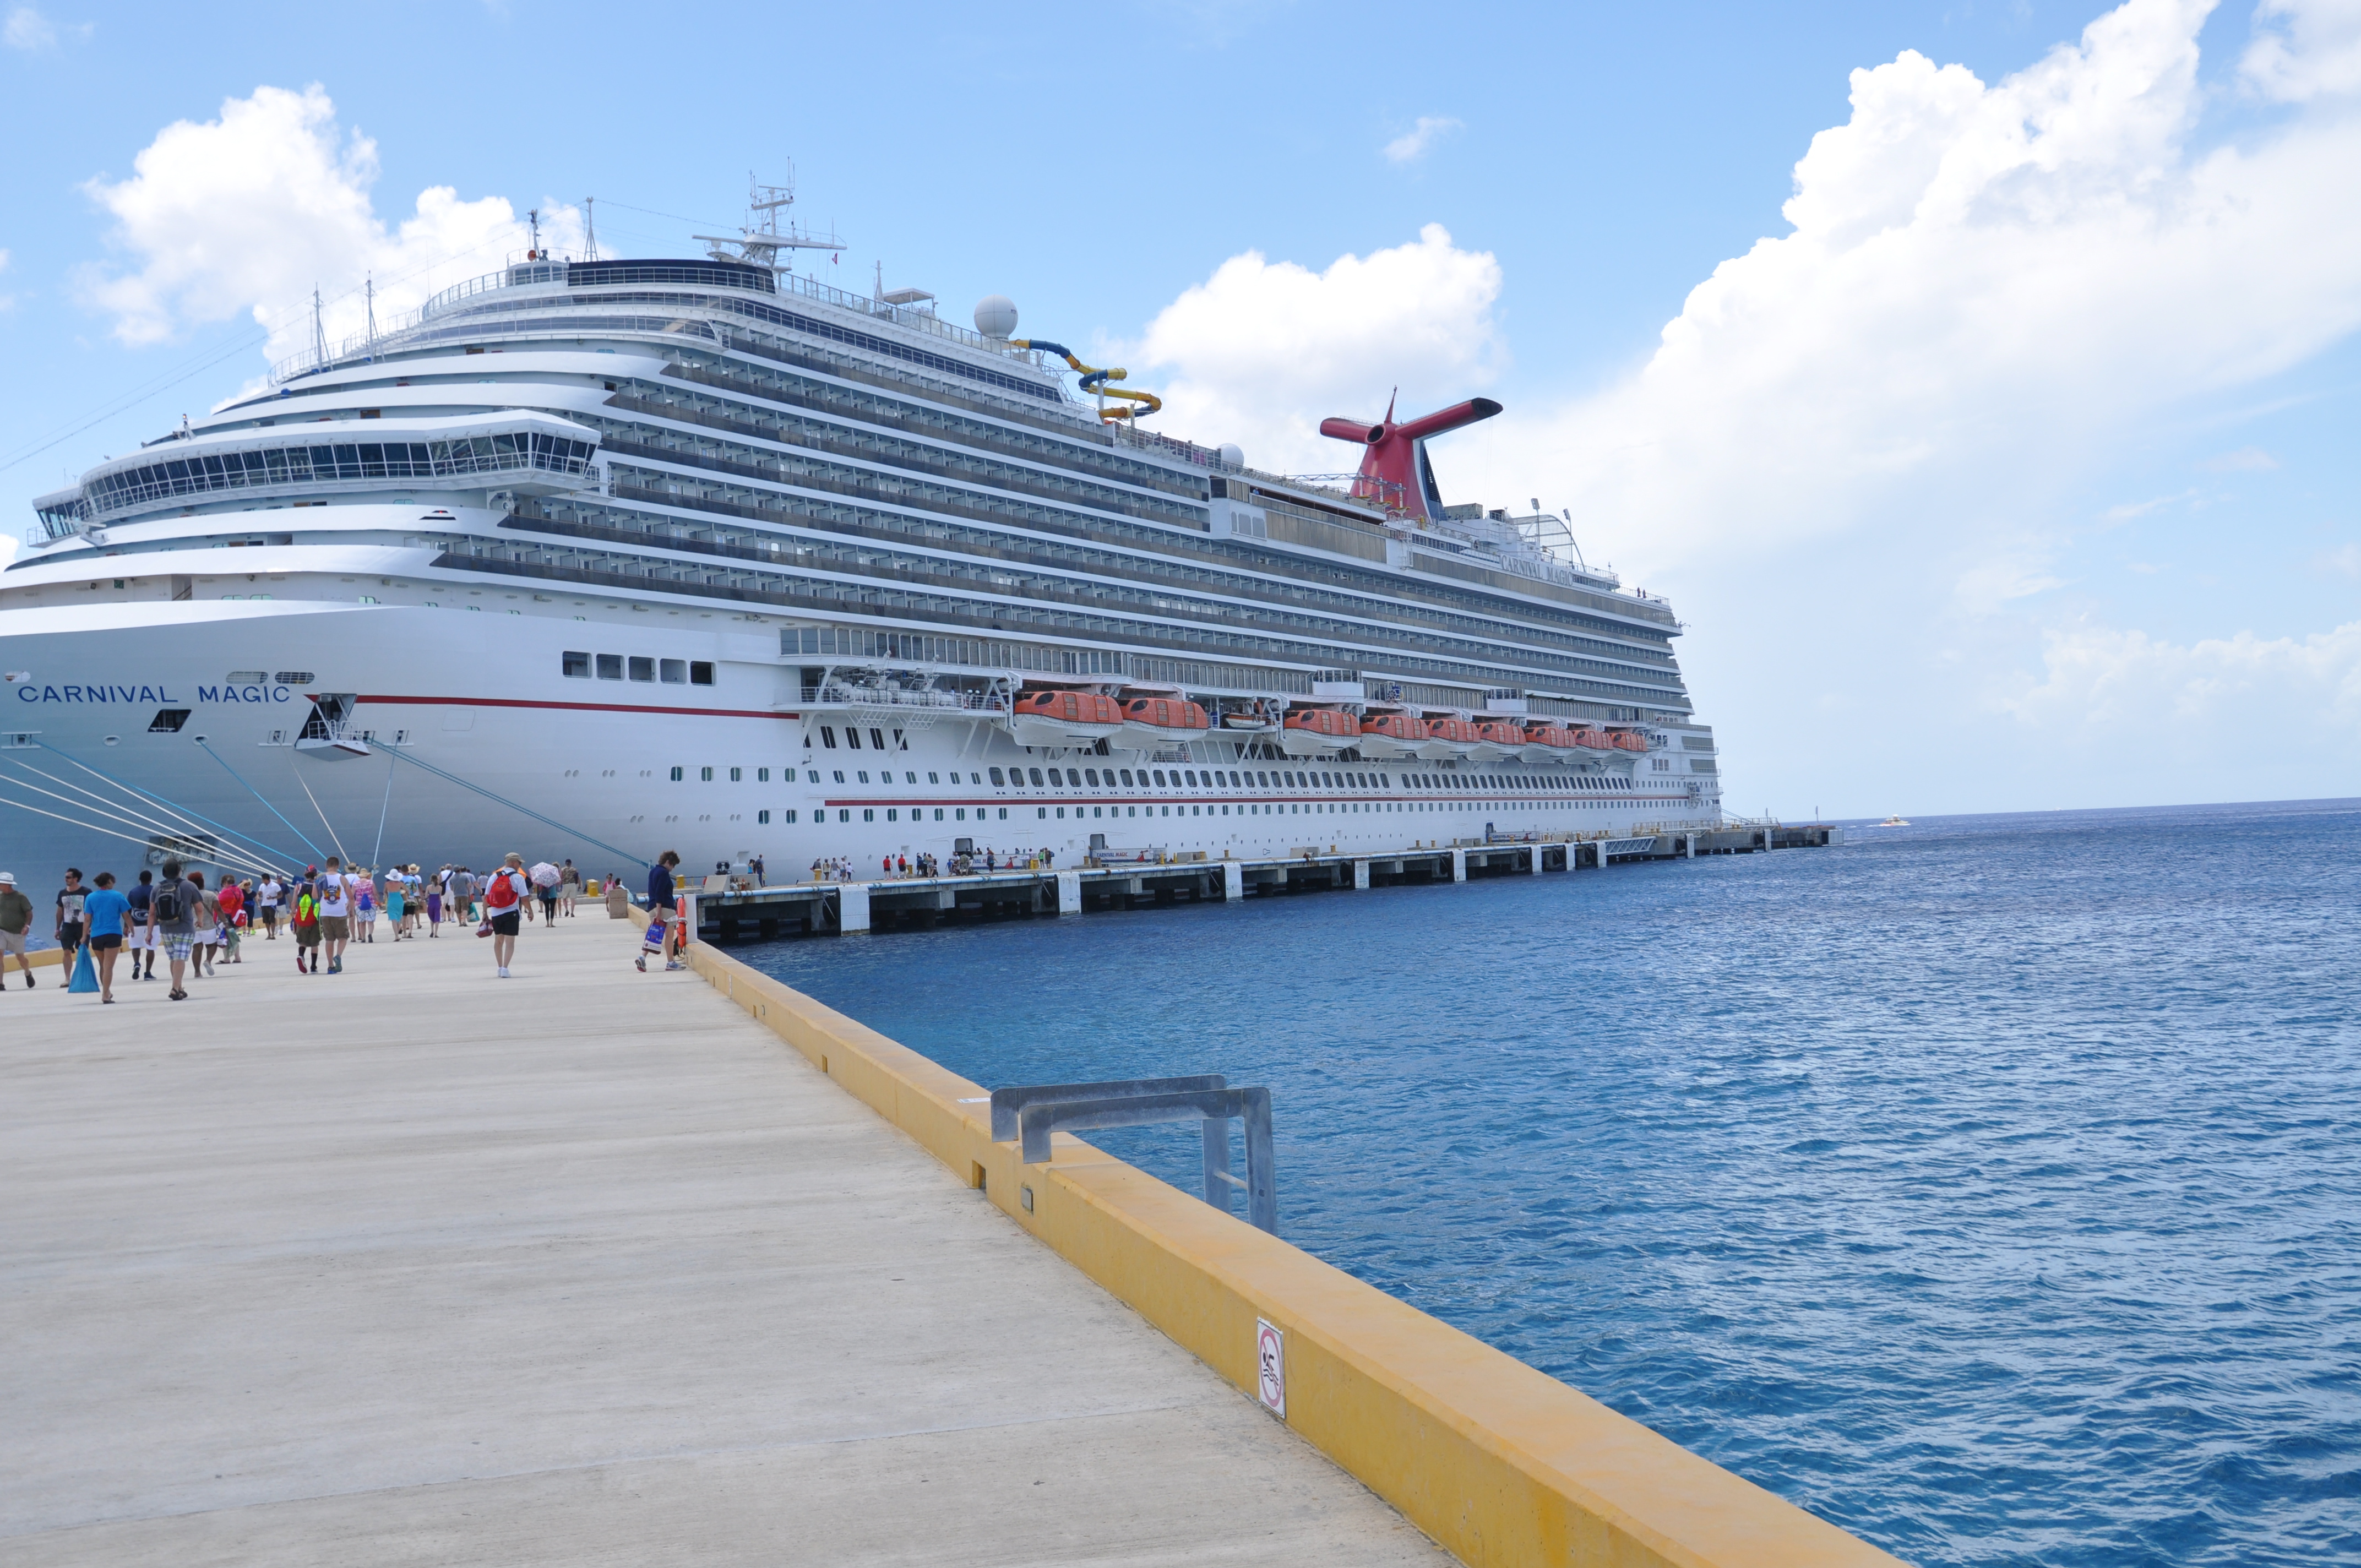 Carnival Magic is an awesome ship Carnival Magic Cruise Review